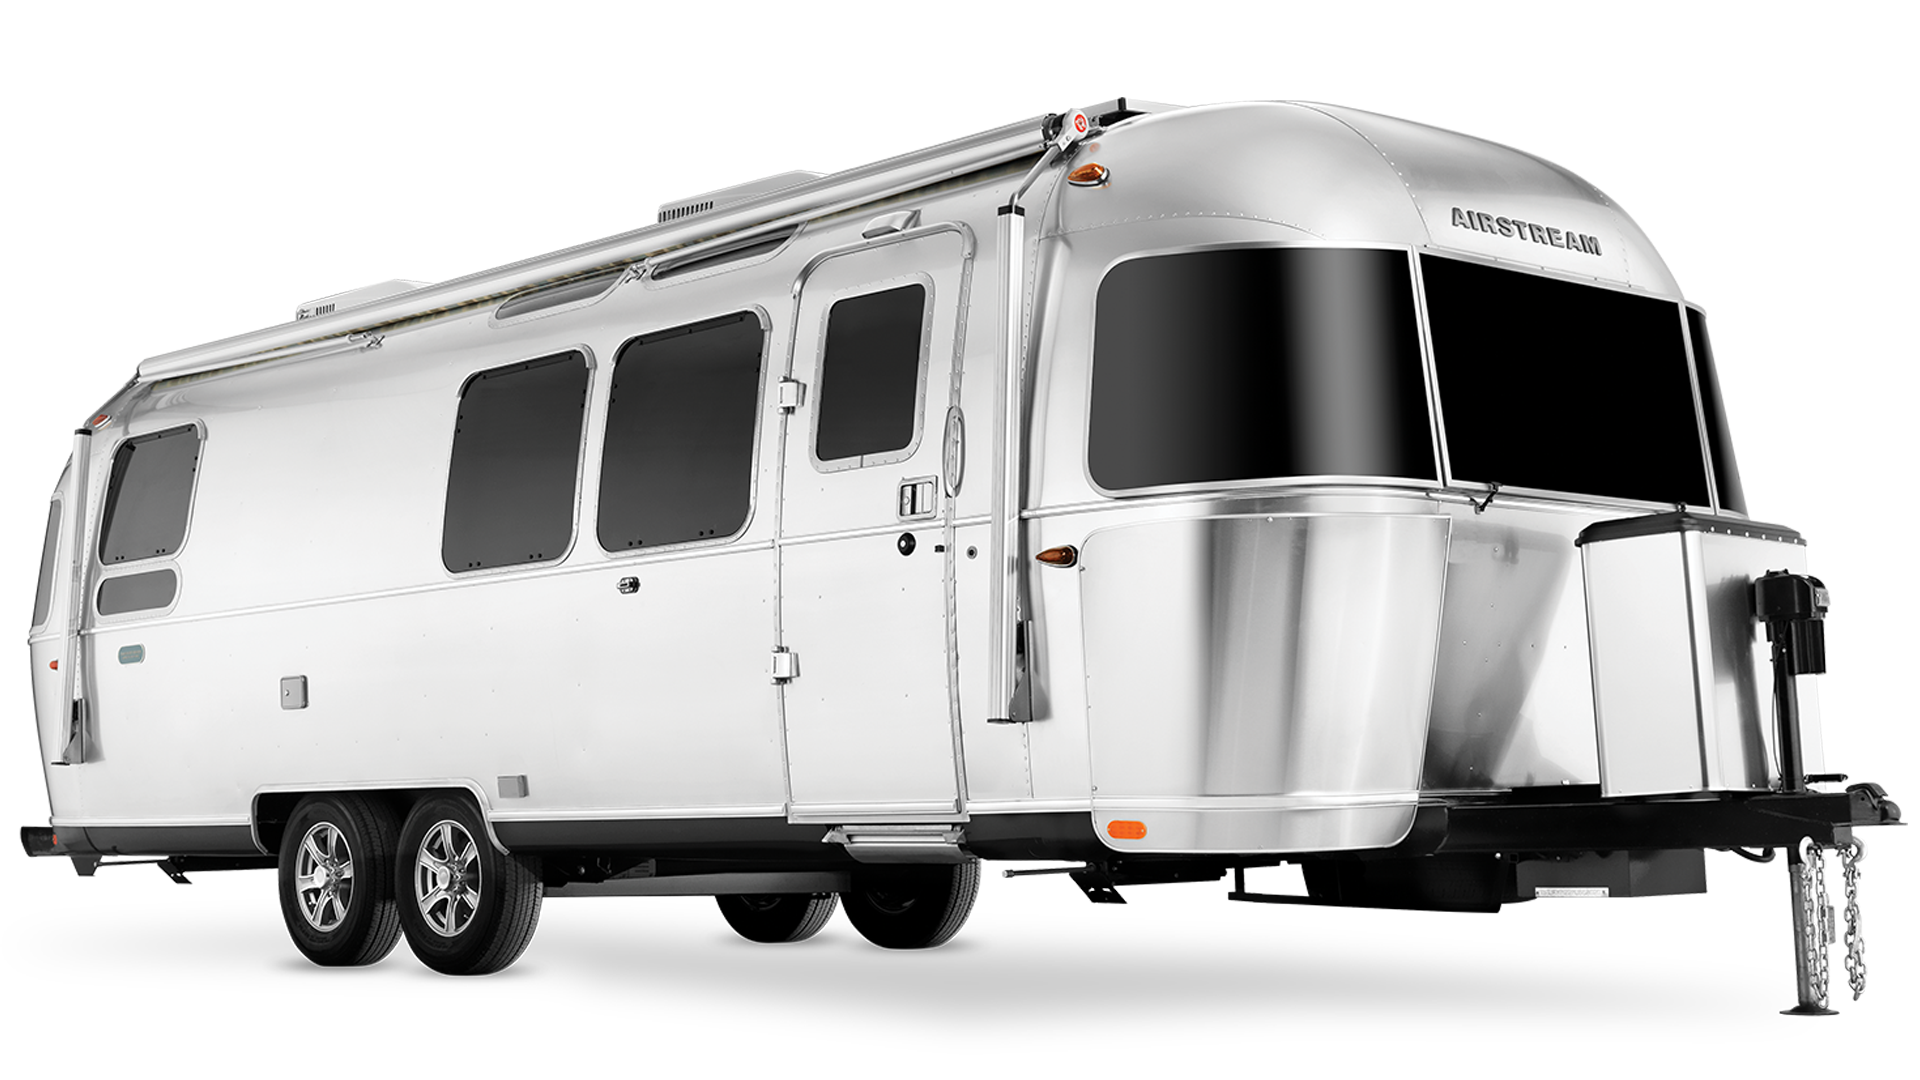 https://cdn.airstream.com/wp-content/uploads/2021/06/Airstream-X-Pottery-Barn-Special-Edition-Exterior.png?auto=format&crop=edges&fit=clamp